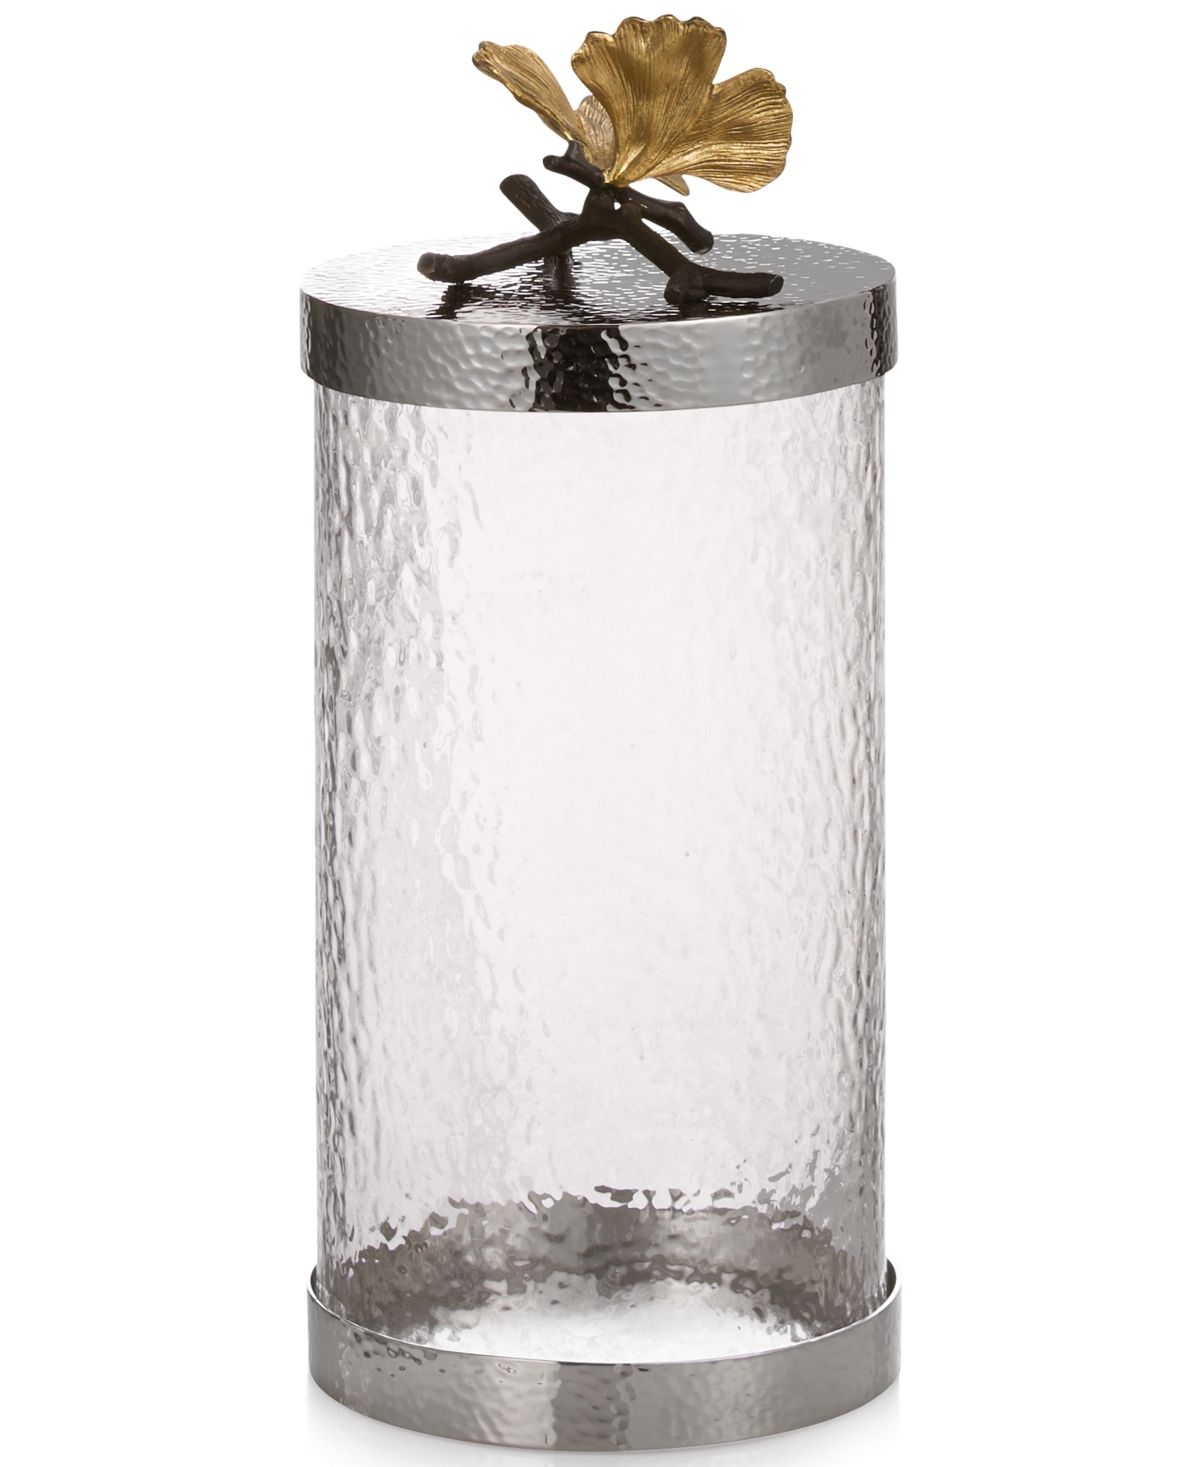 Michael Aram Butterfly Ginkgo Large Kitchen Canister | Macys (US)